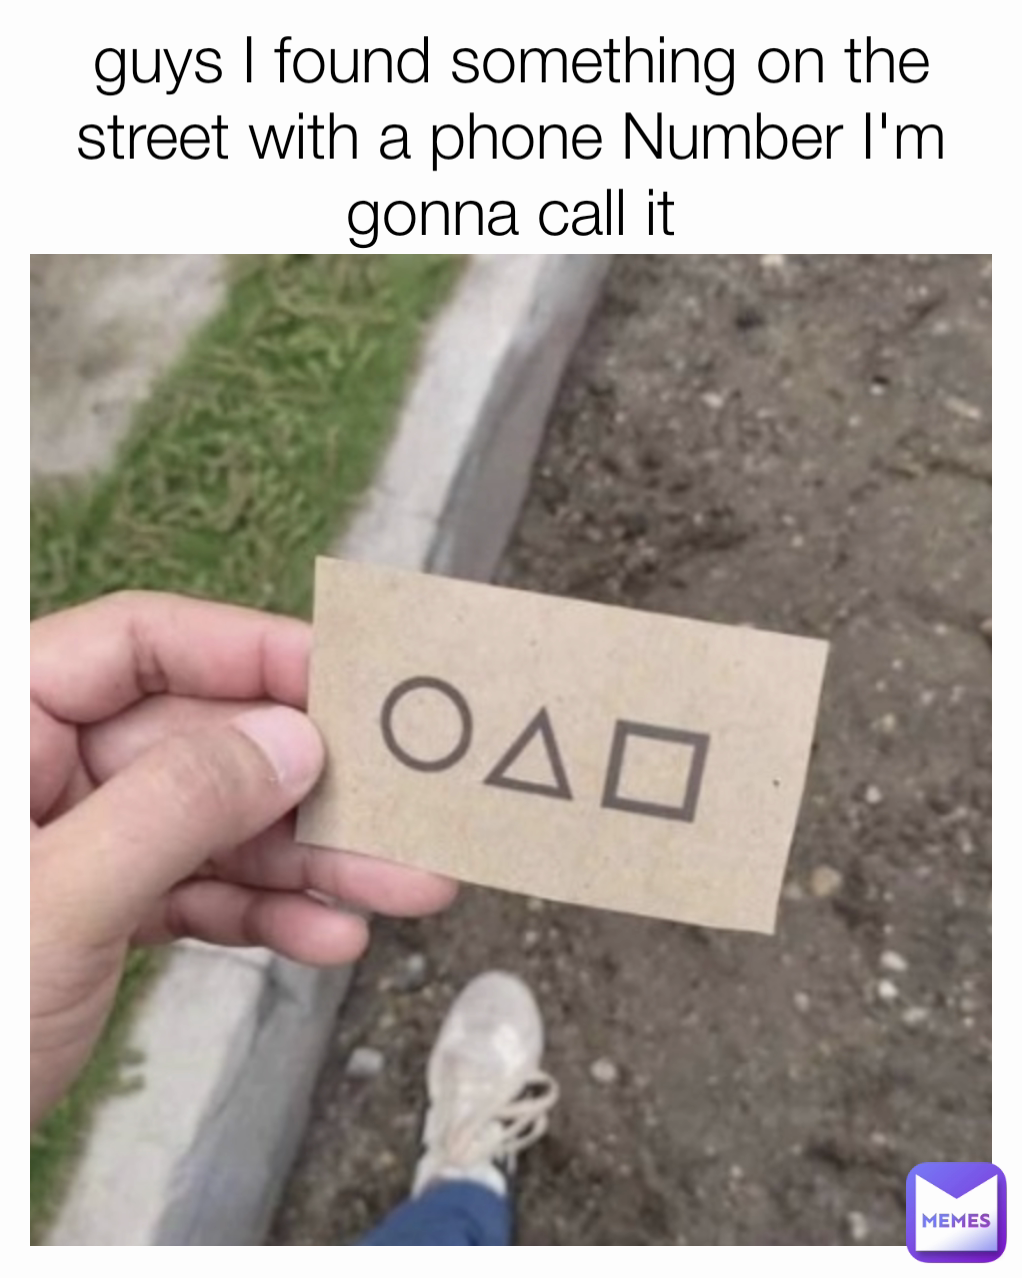 guys I found something on the street with a phone Number I'm gonna call it
